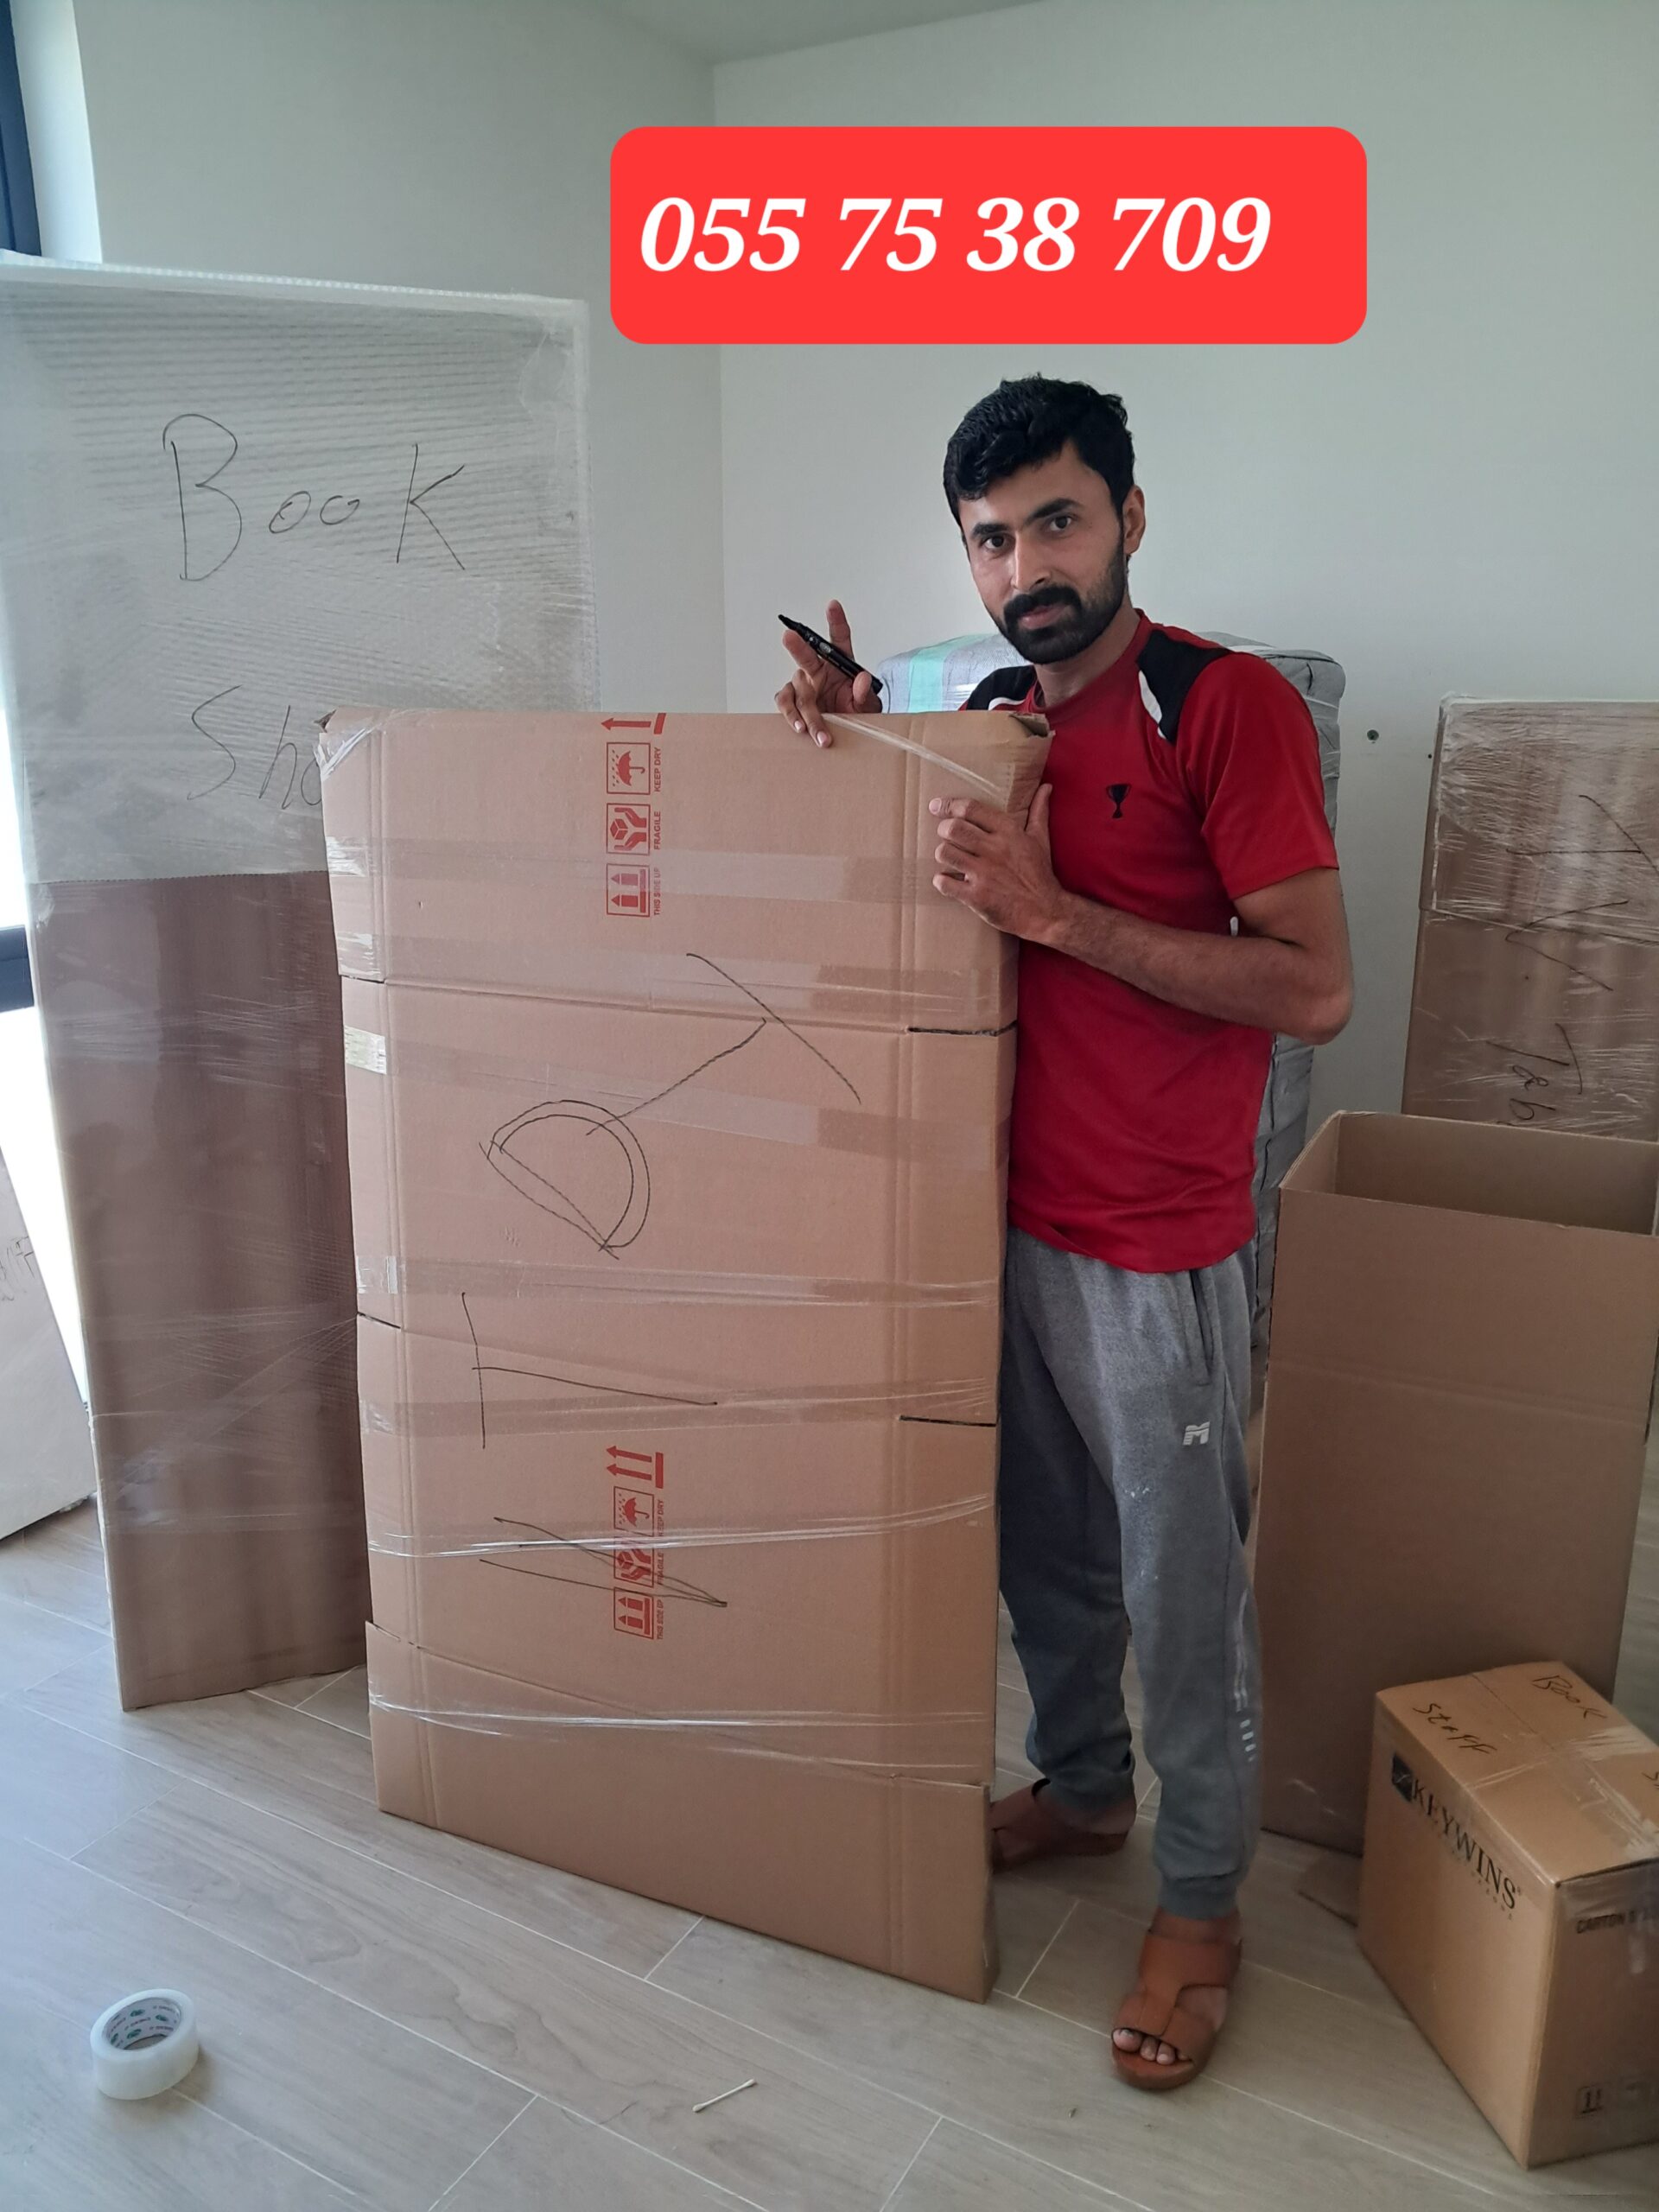 BEST MOVERS AND PACKERS UAE 055 75 38 709